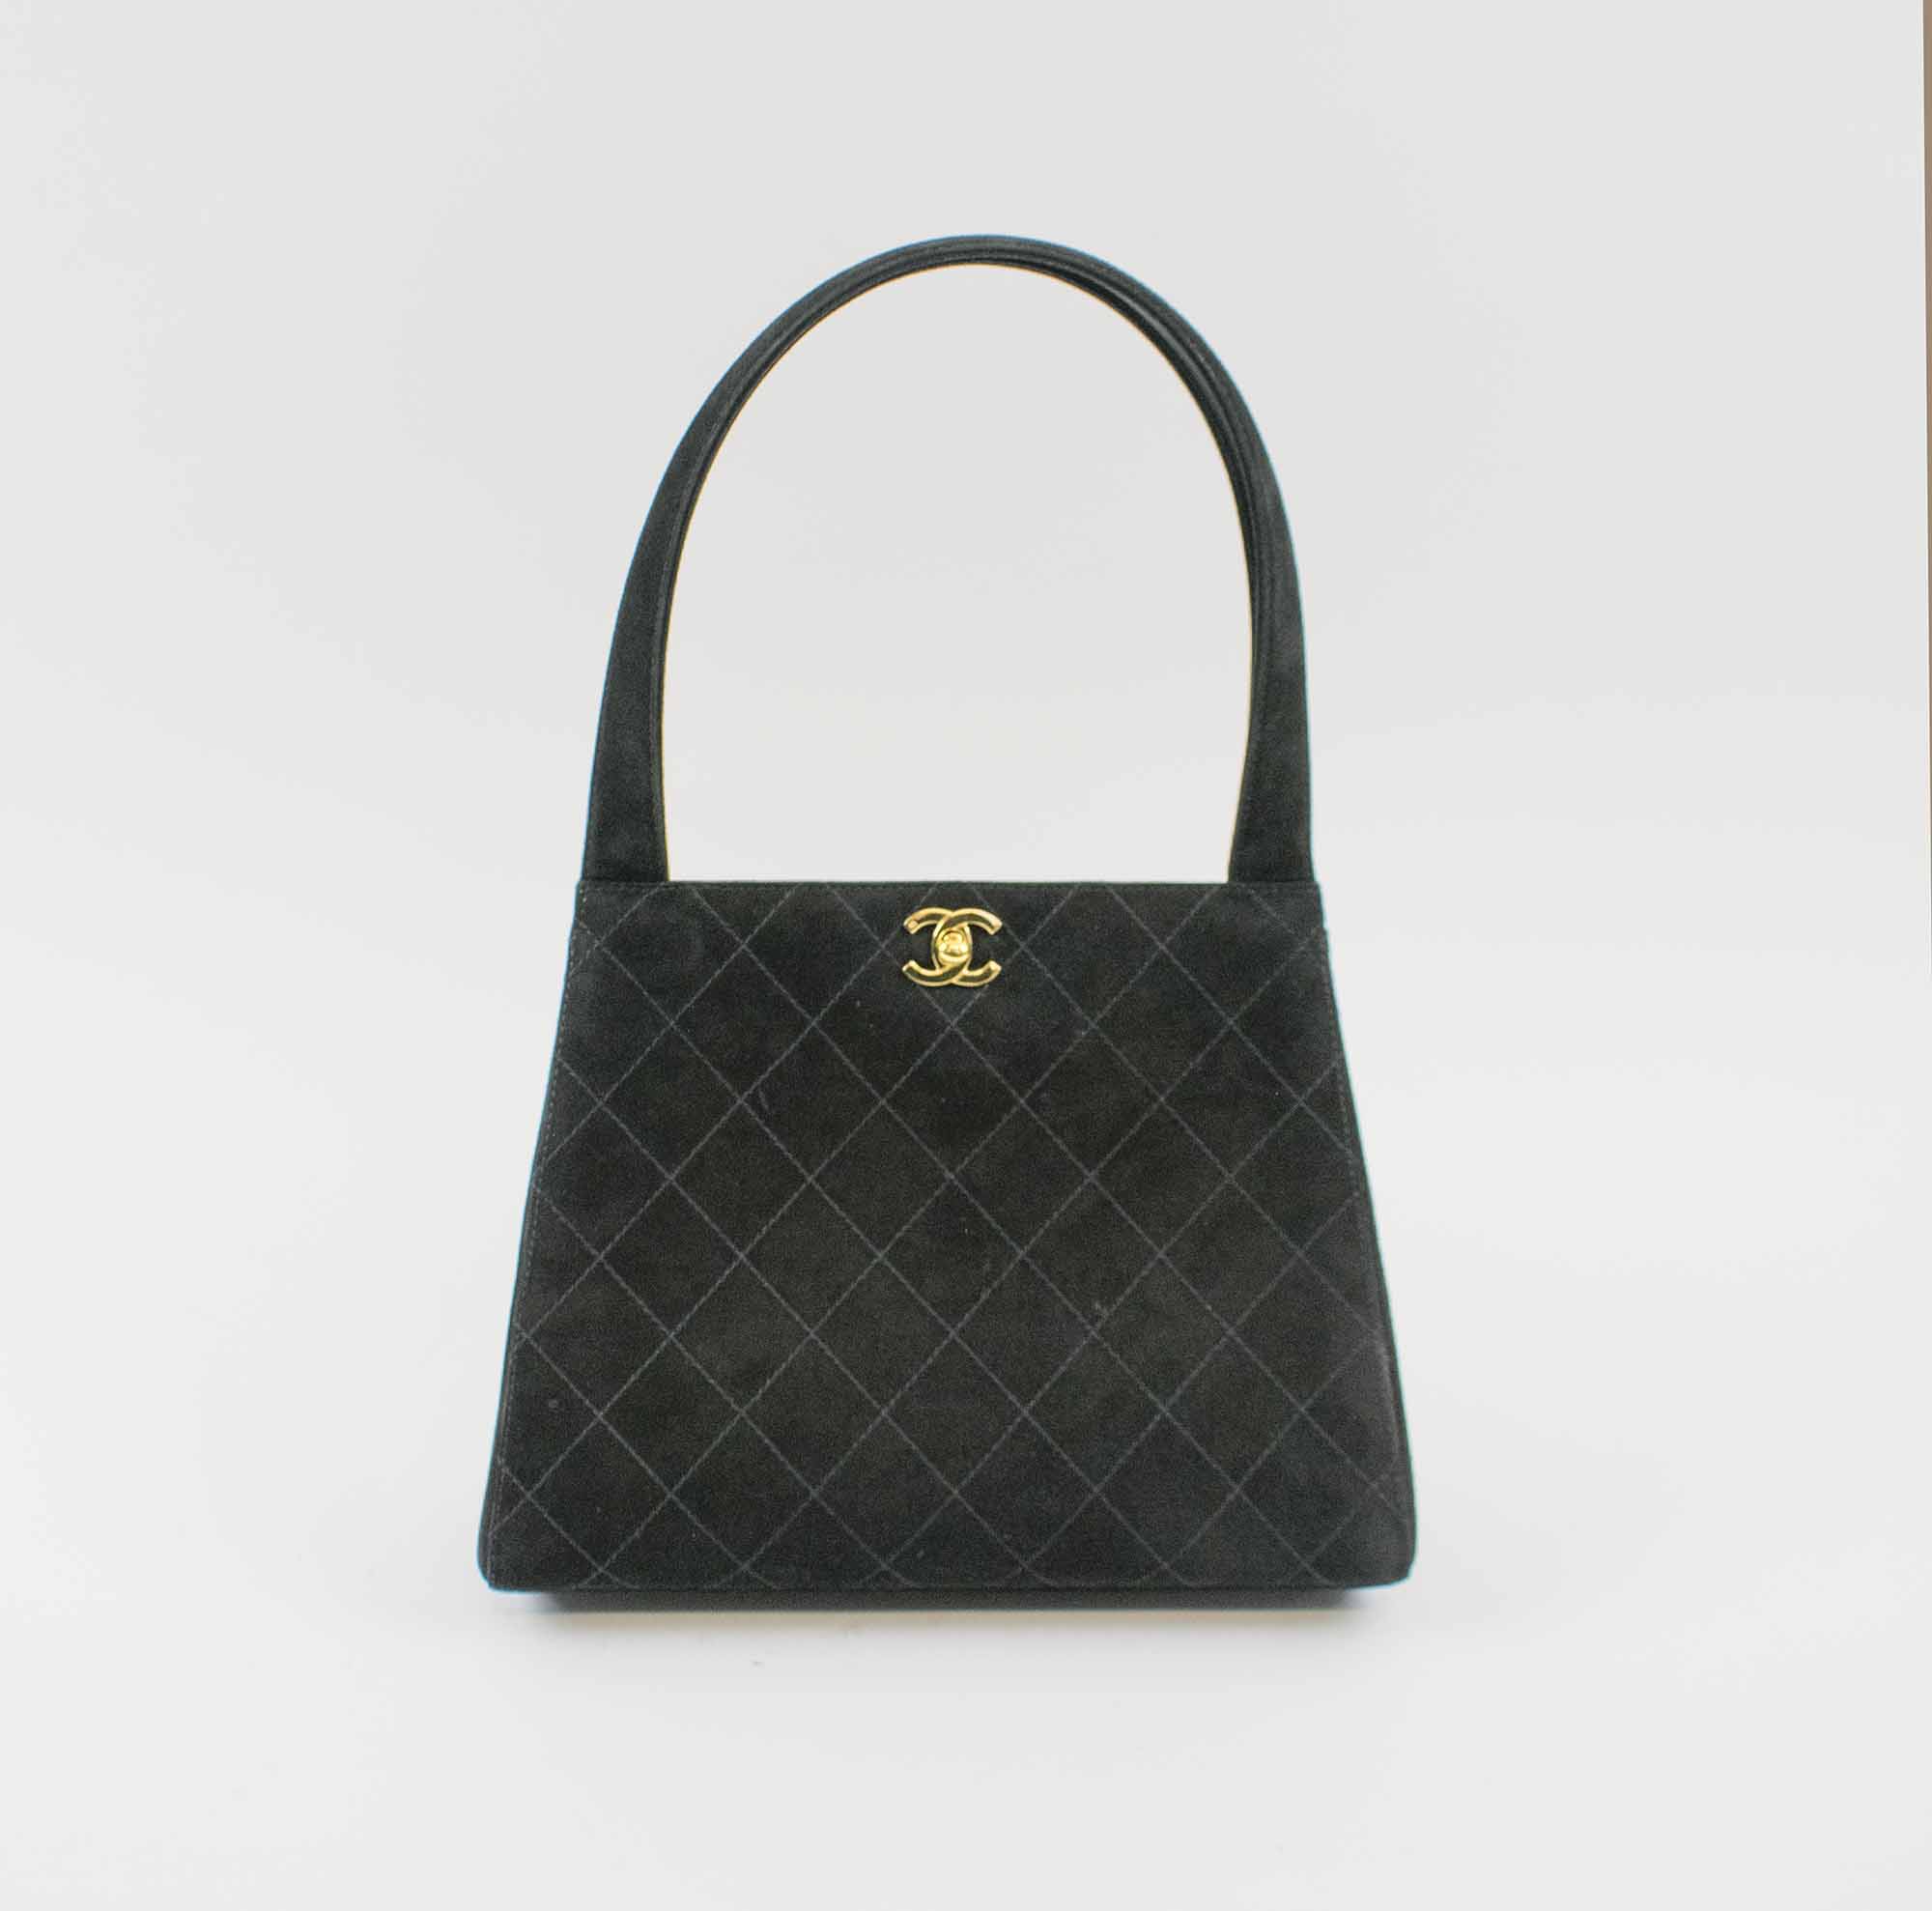 GIANNI VERSACE HANDBAG, black fabric with patent leather trims and top  handles, with top zip closure, lock and keys, bottom feet, iconic Medusa  logo at the front, black fabric lining, with dust